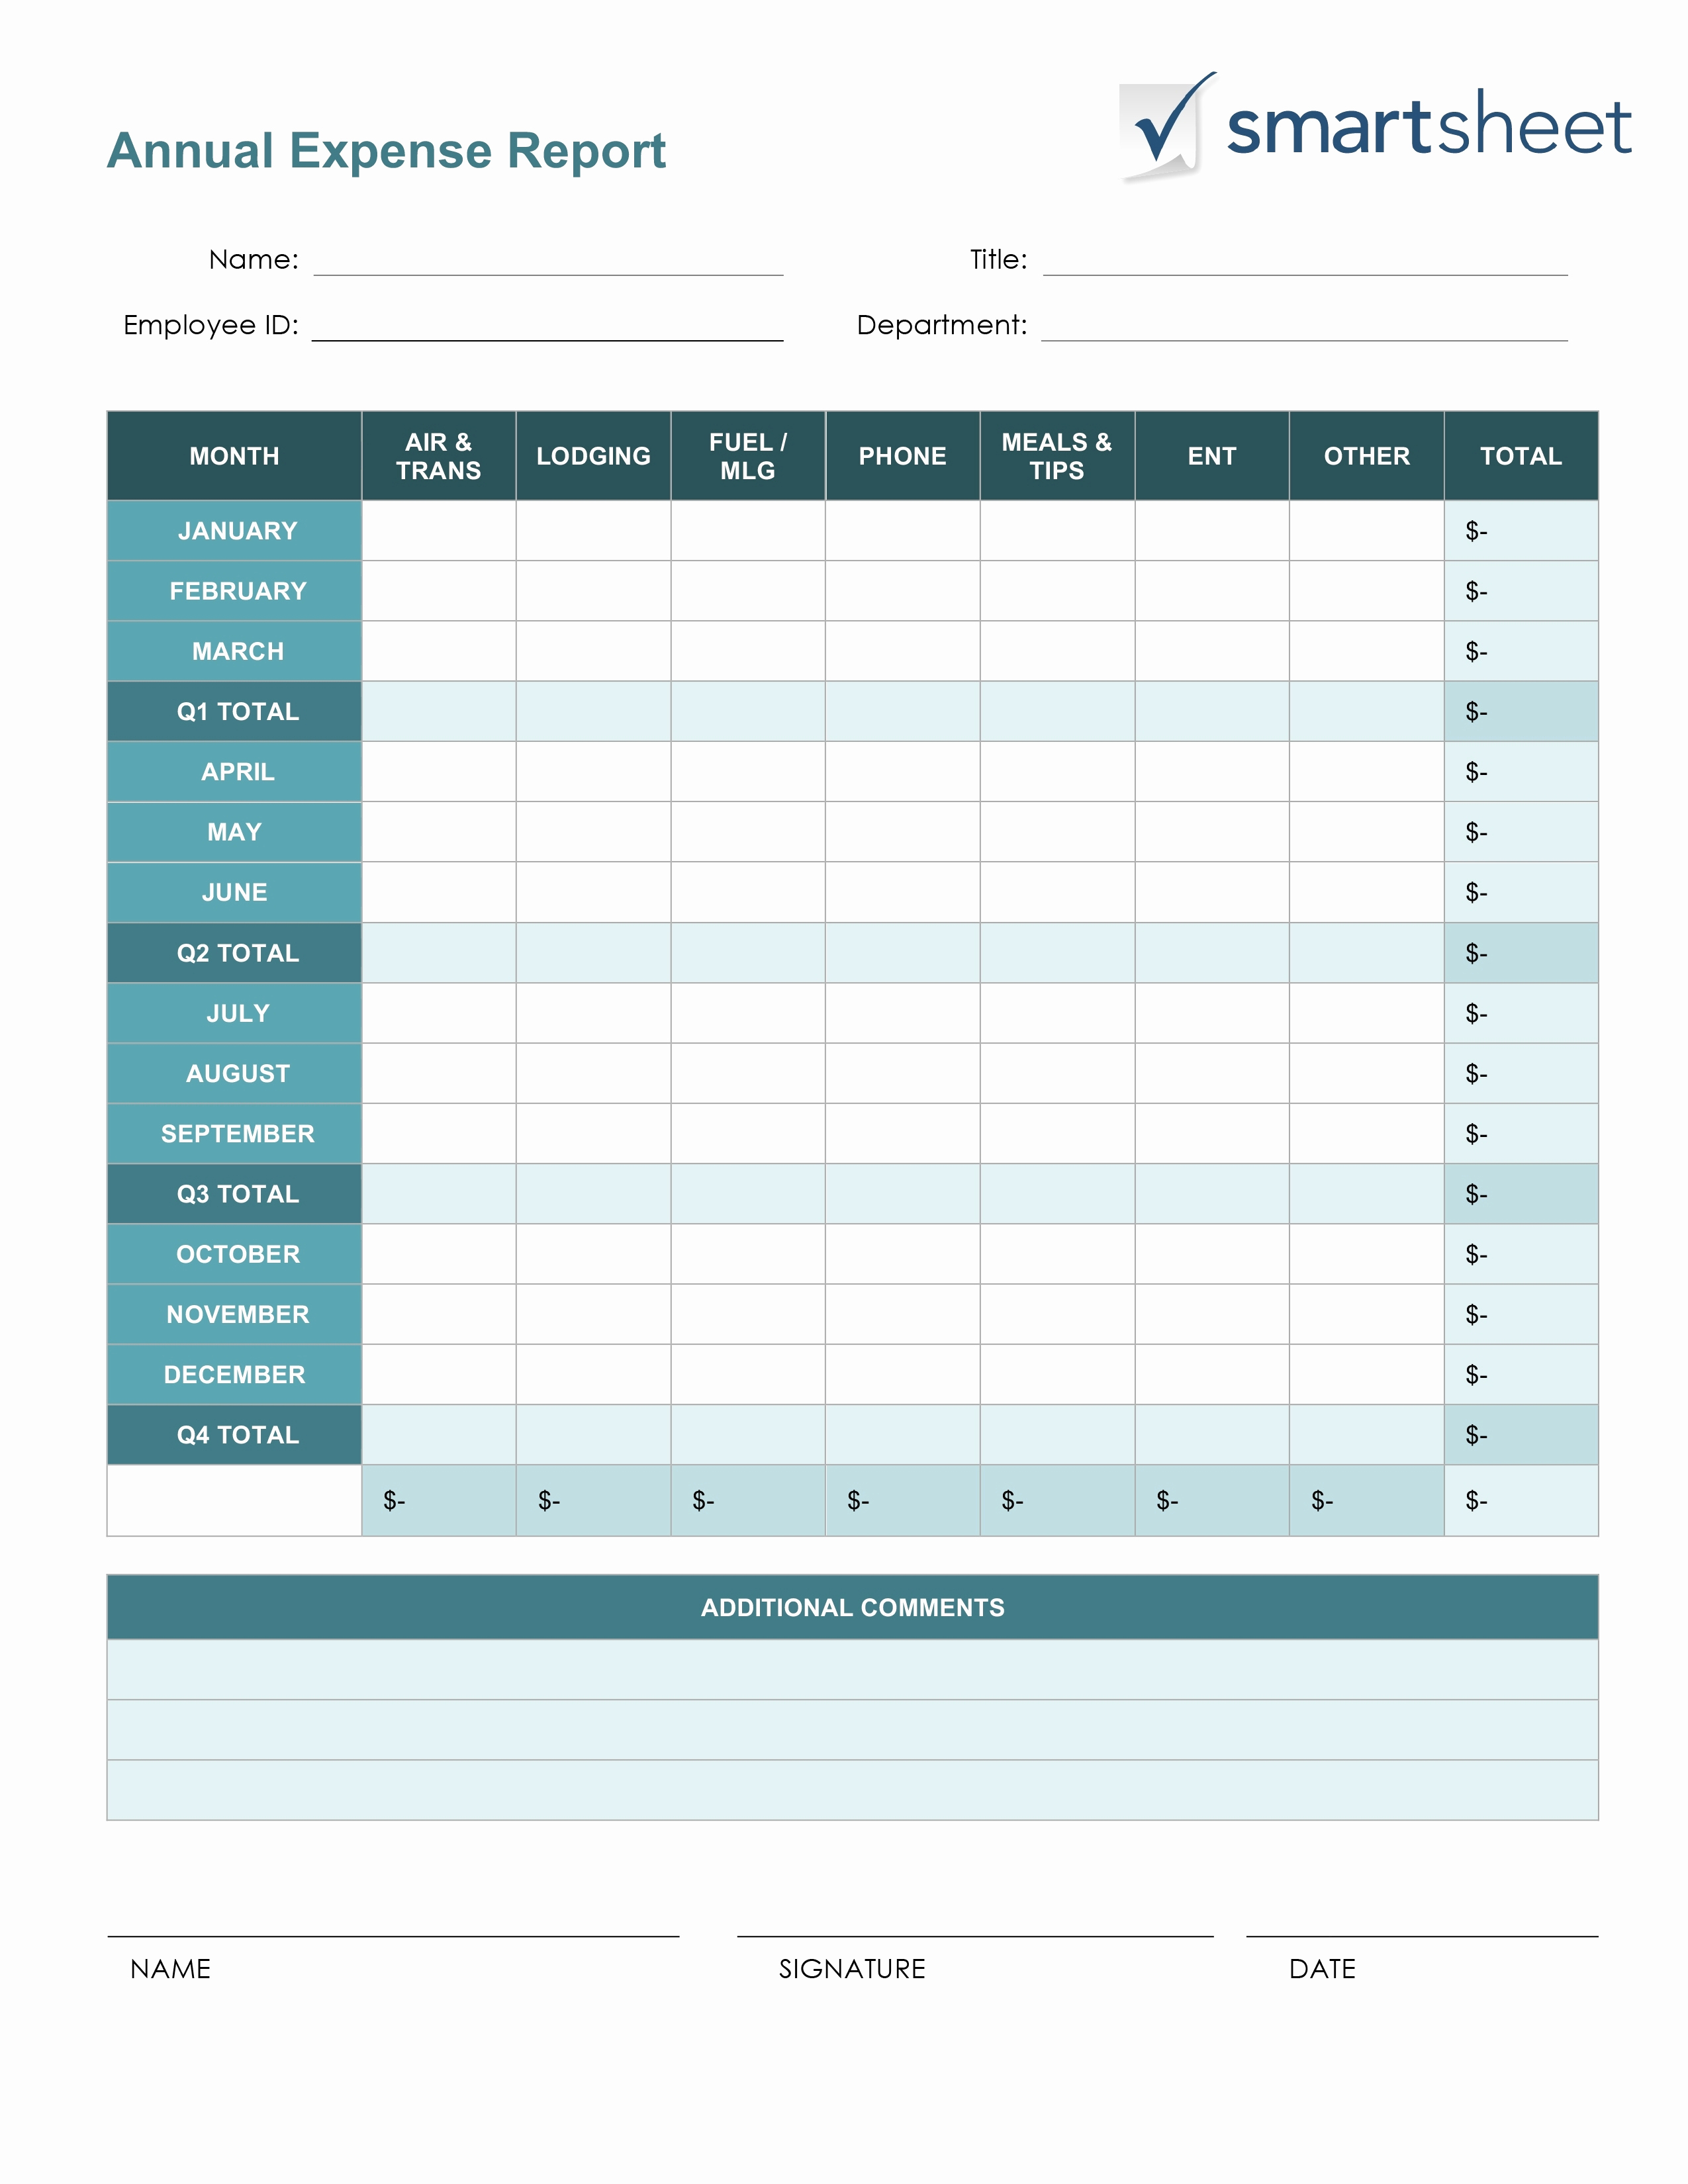 Self Assessment Tax Return Spreadsheet Template Intended For Tax Spreadsheet Template Unique Free Expense Report Templates With